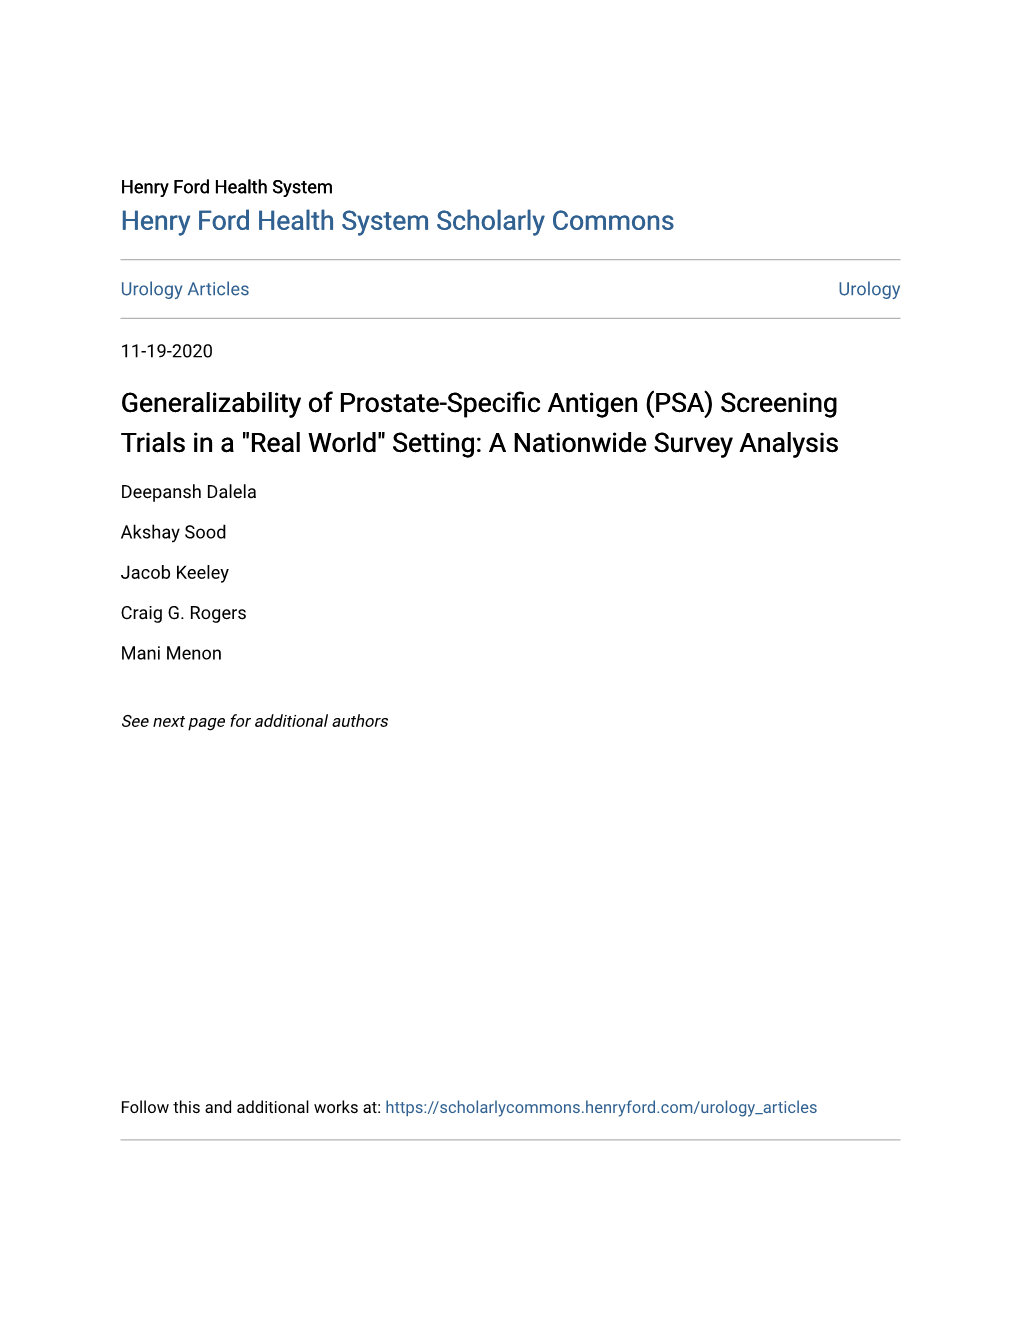 Generalizability of Prostate-Specific Antigen (PSA) Screening Trials in a "Real World" Setting: a Nationwide Survey Analysis